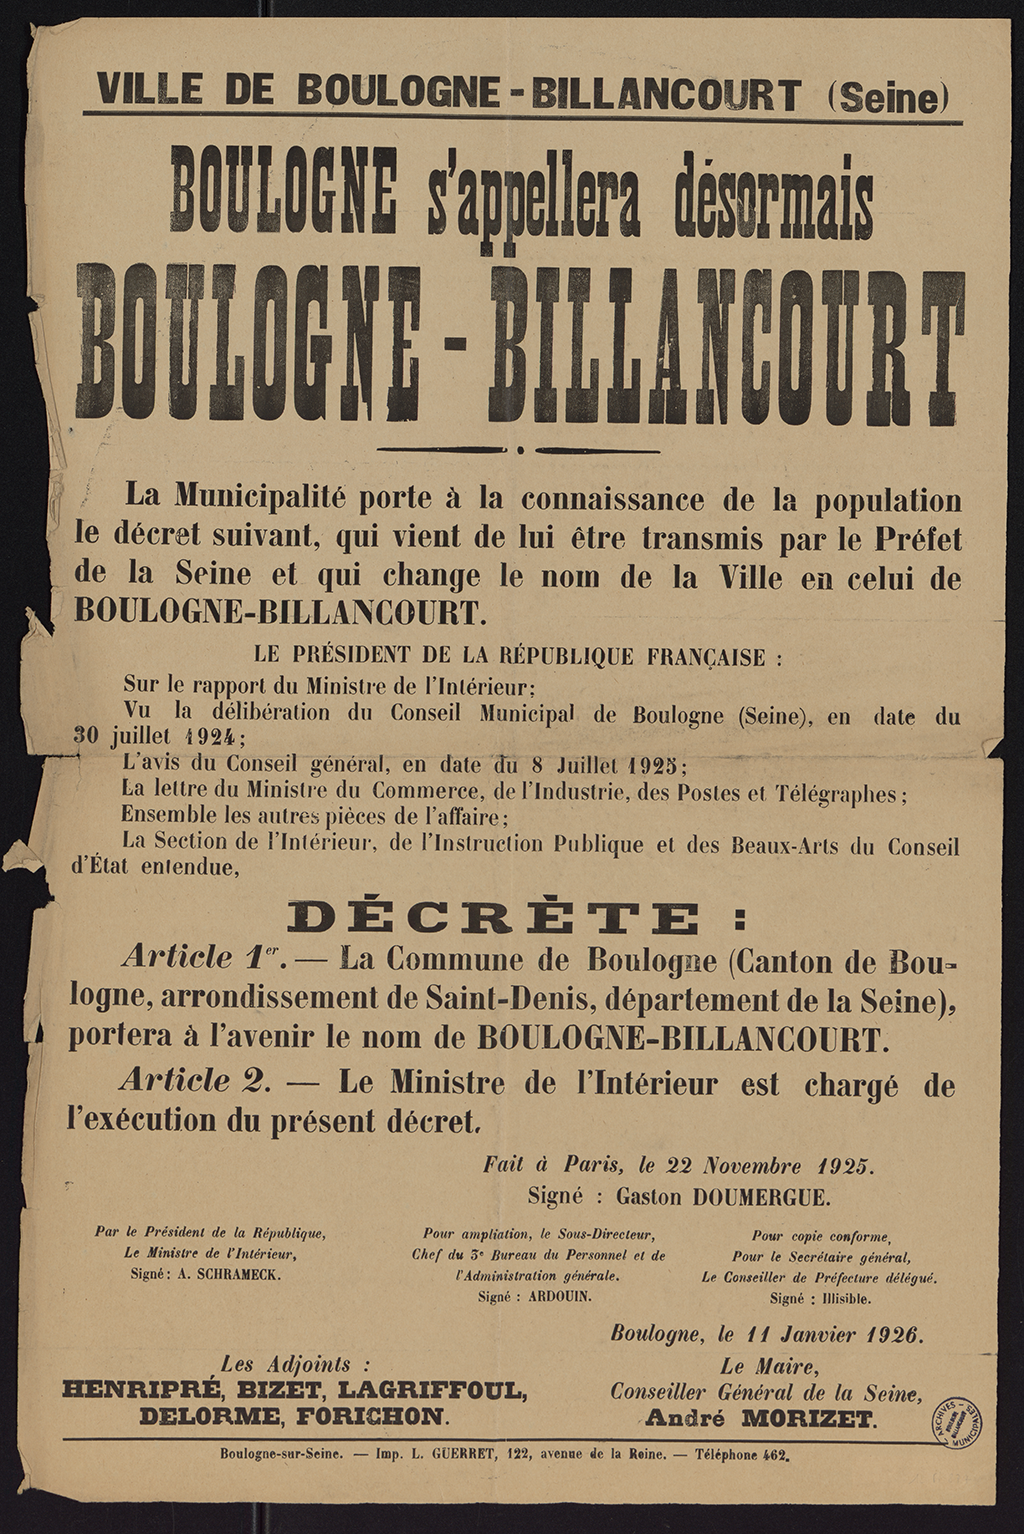 A photograph of an older piece of paper. It writes &ldquo;BOULOGNE - BILLANCOURT&rdquo; It has a variety of different-sized text with bold wording.